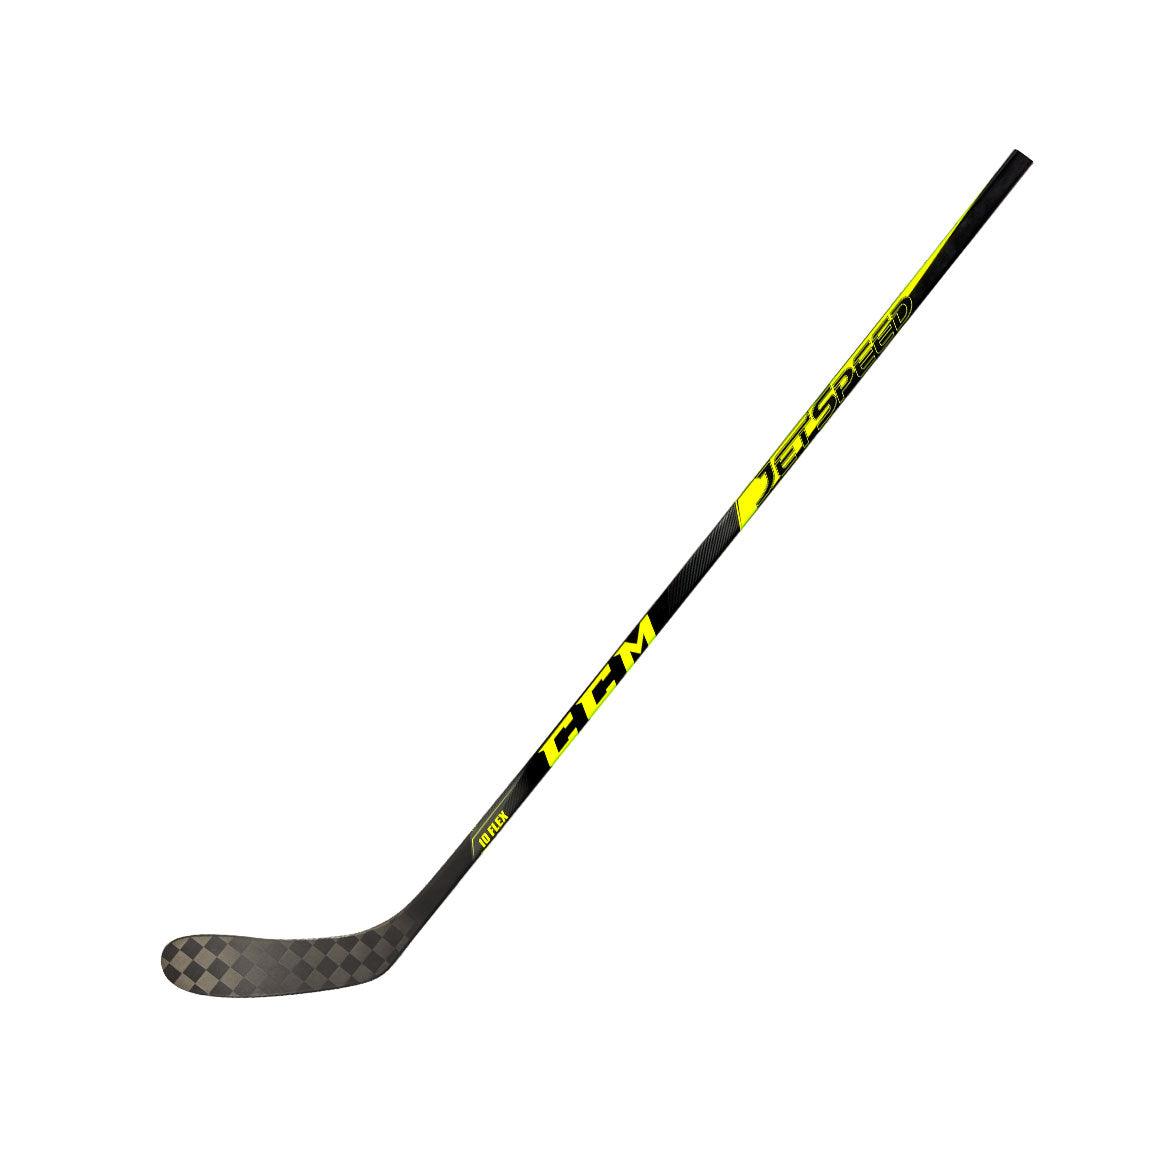 Jetspeed 10 Youth Hockey Stick - Youth - Sports Excellence